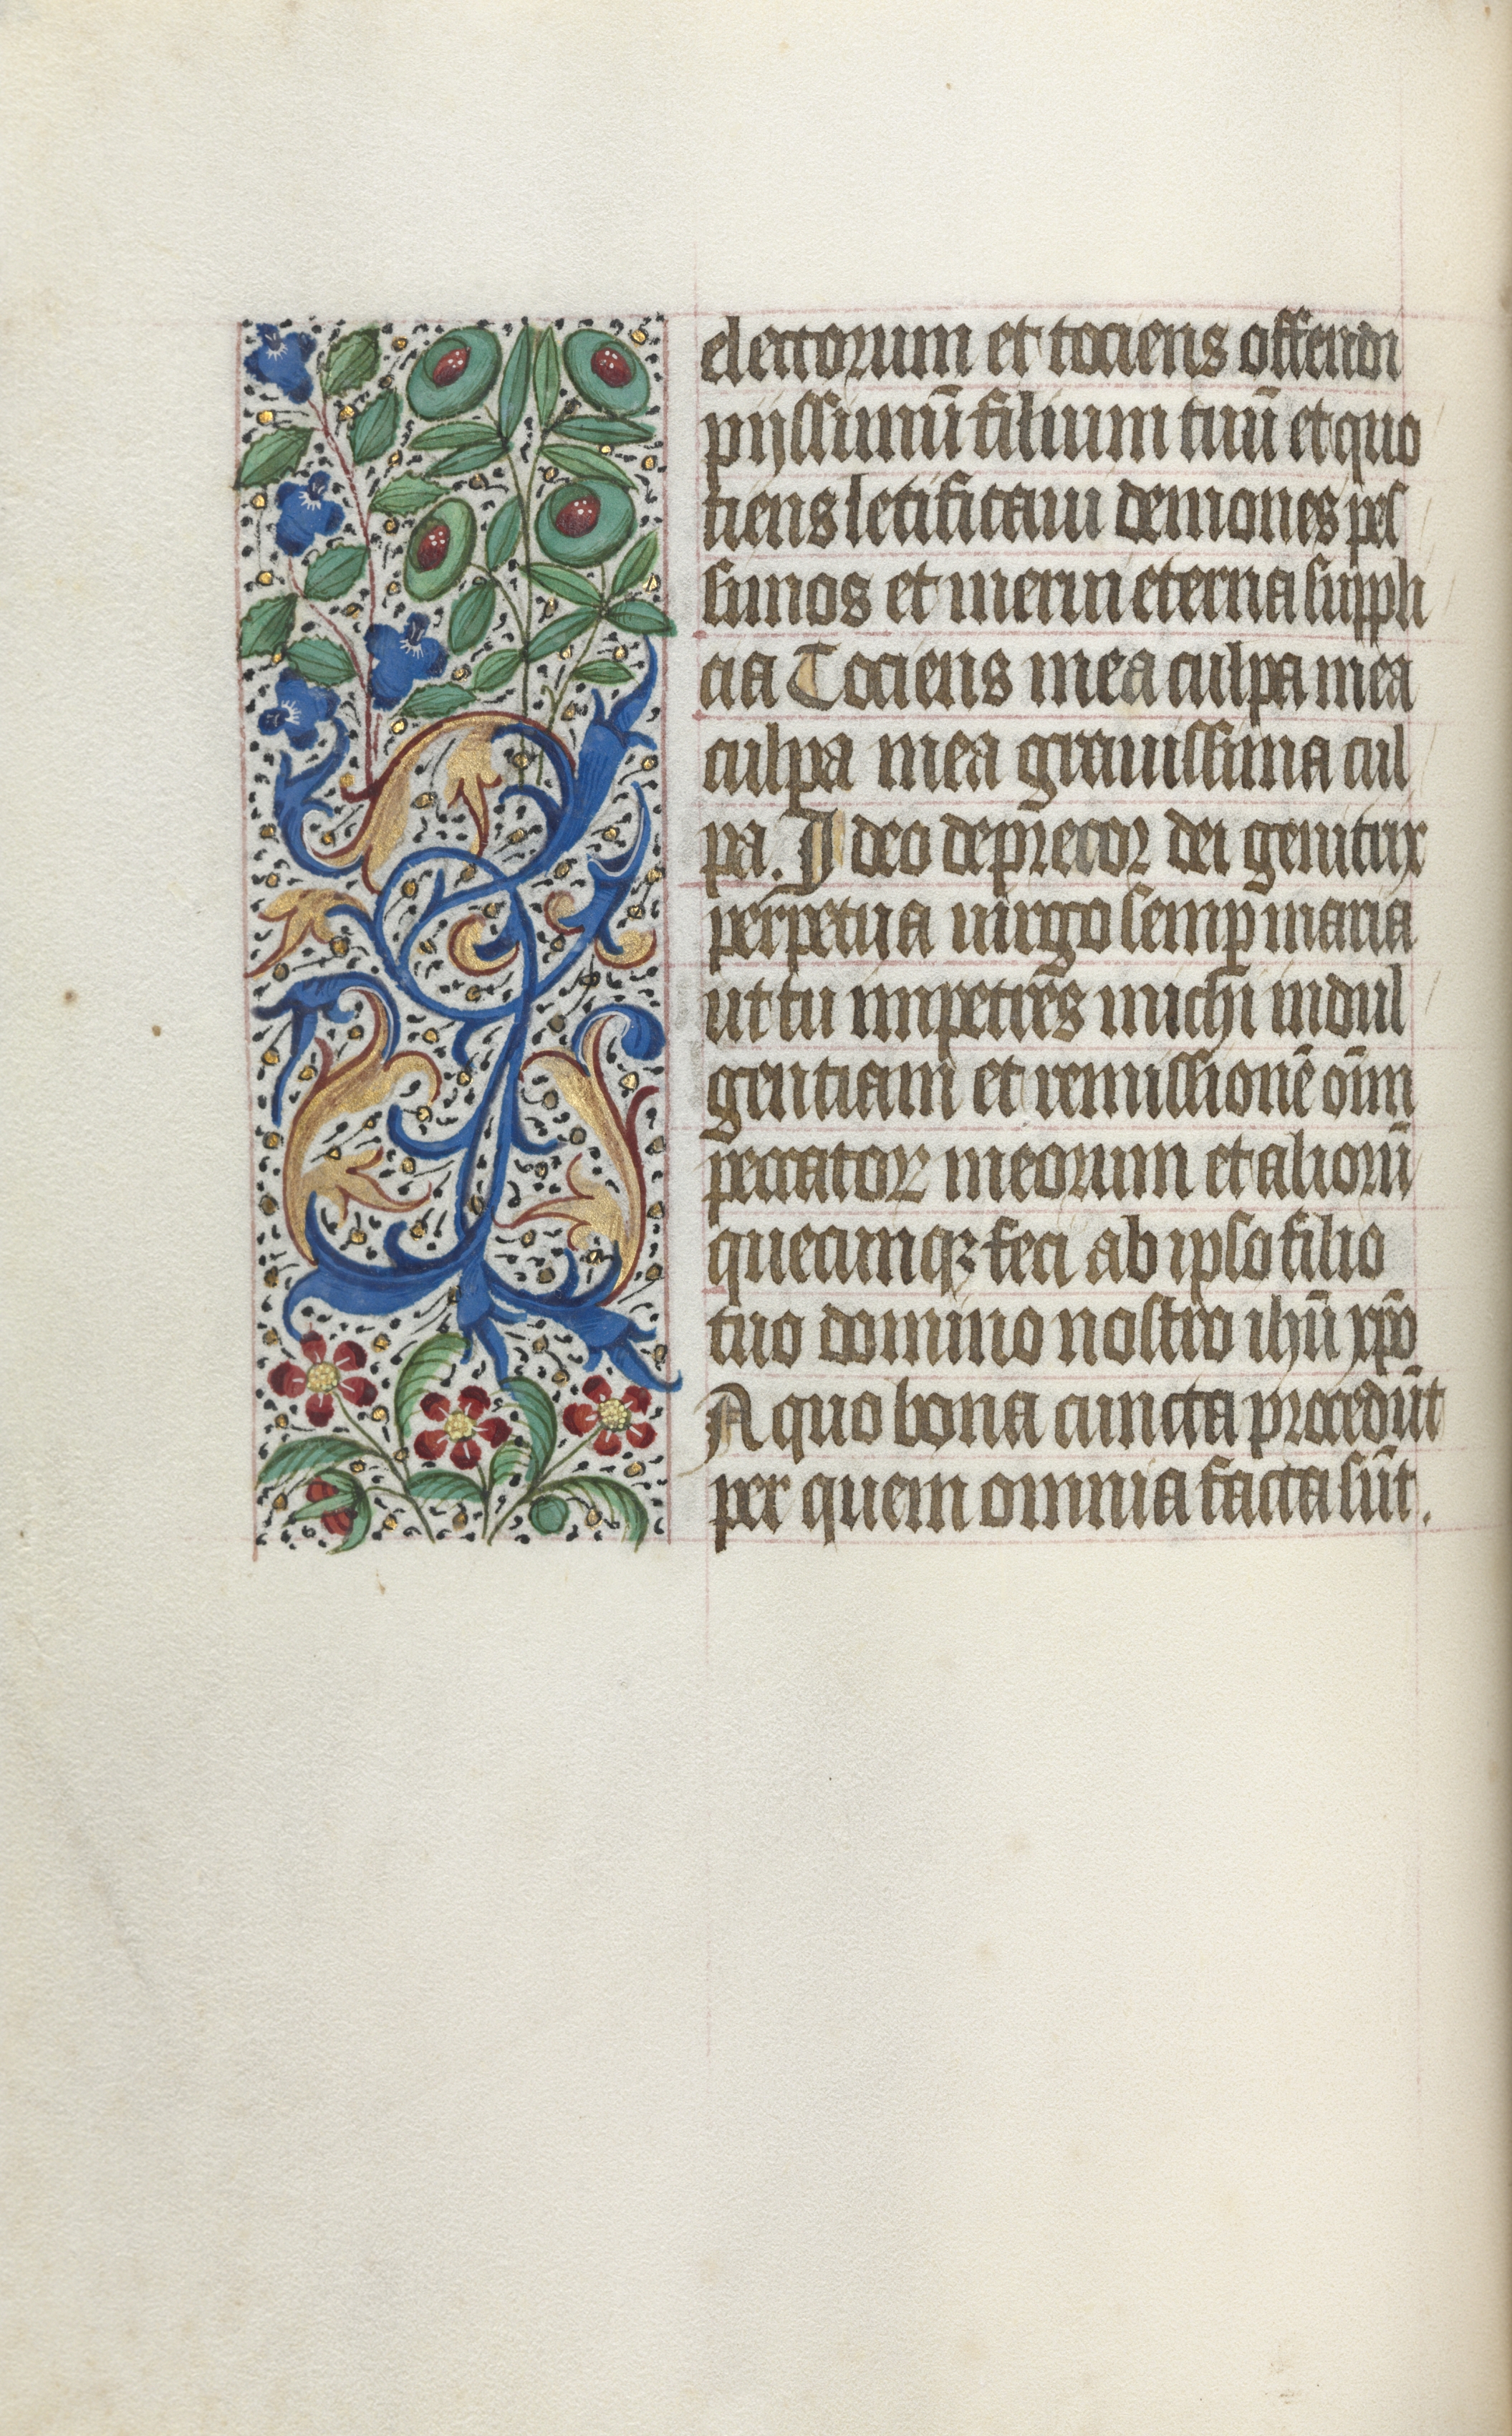 Book of Hours (Use of Rouen): fol. 25v